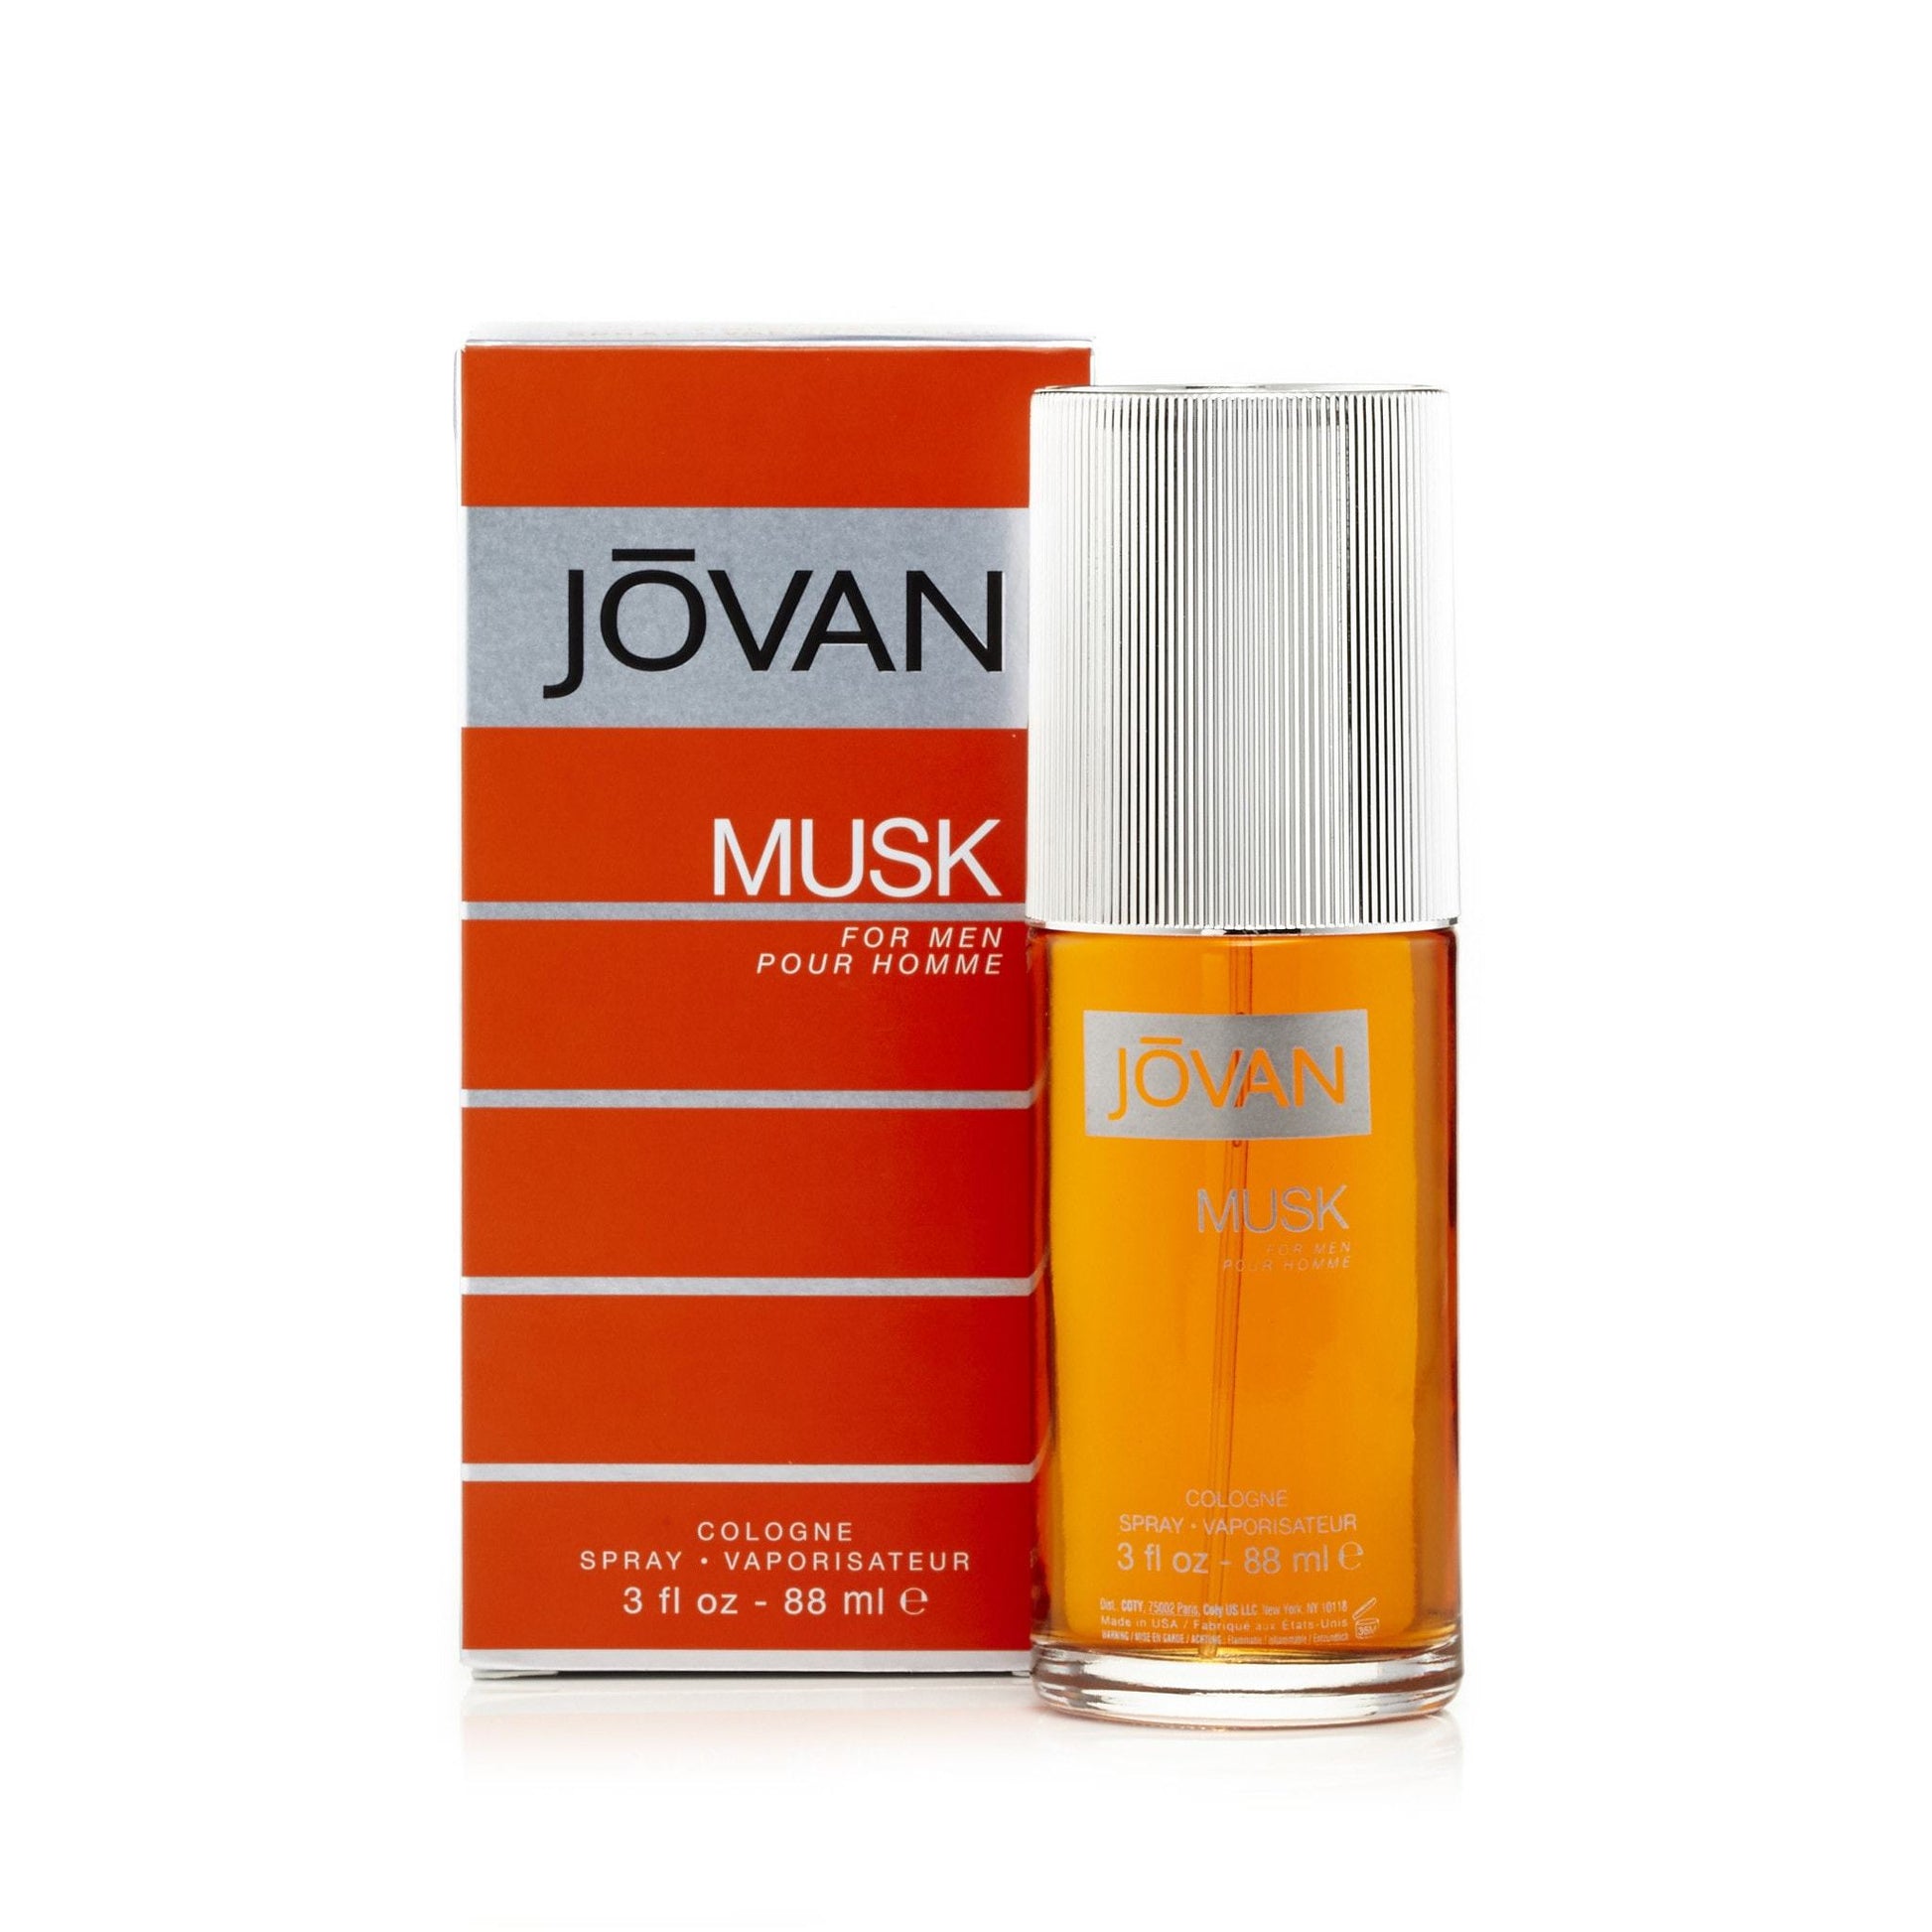 Jovan Musk Cologne for Men by Coty, Product image 1